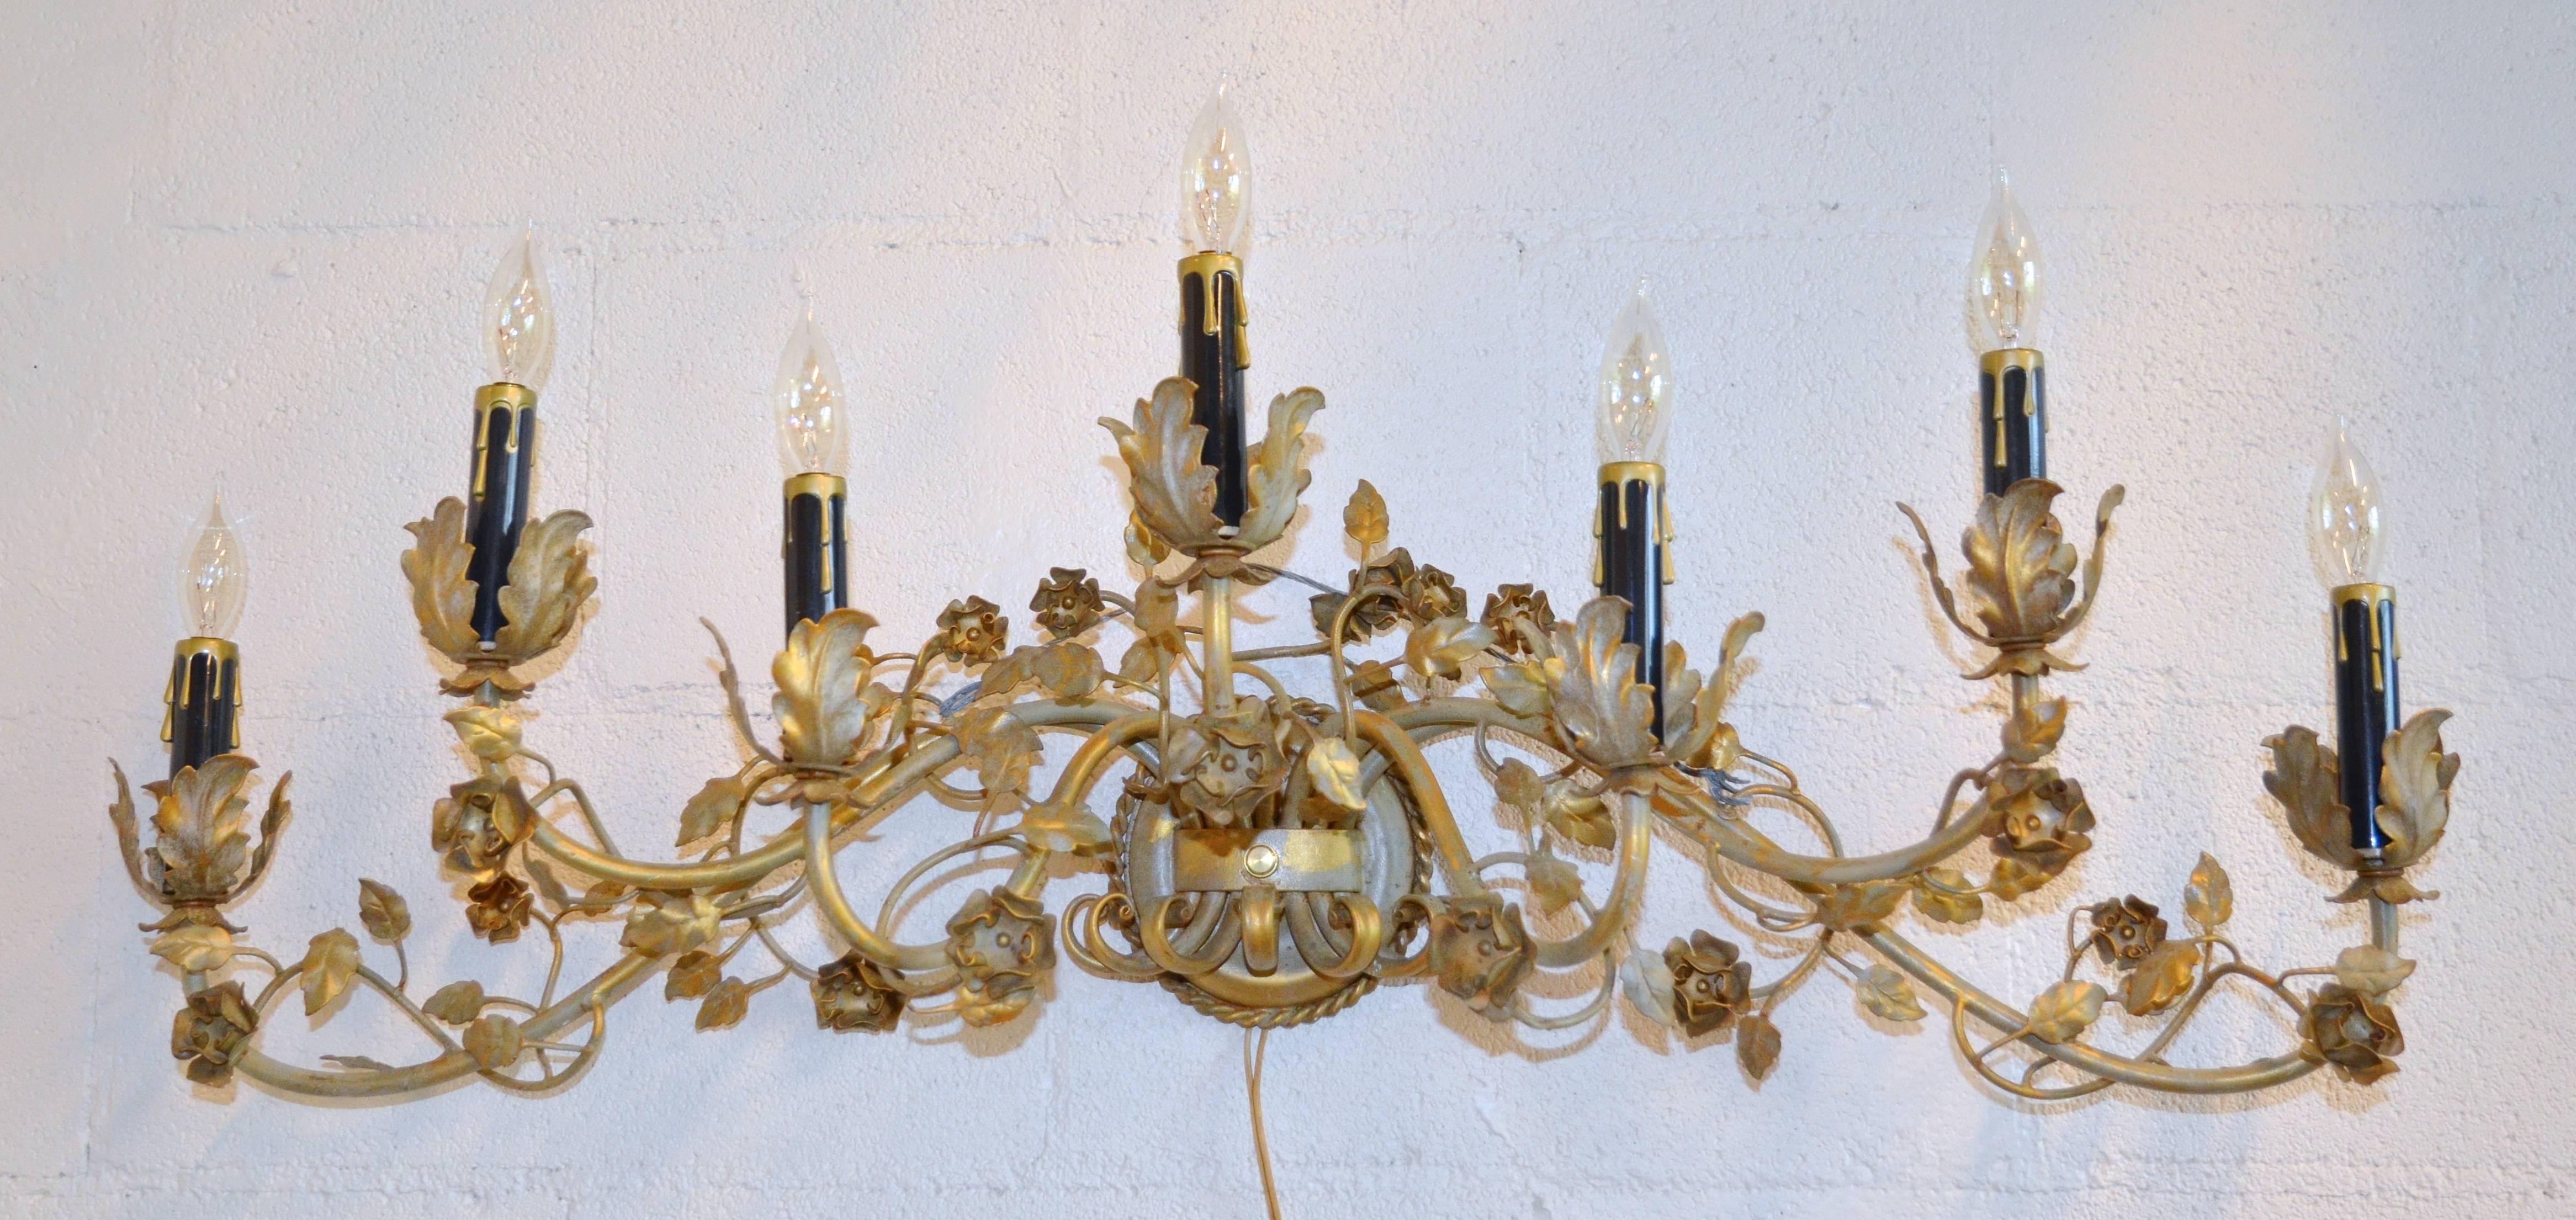 Mid-Century floral gilt sconces with black candle sheathes. This pair show great style and movement in true tole form. Measurement for height is 10